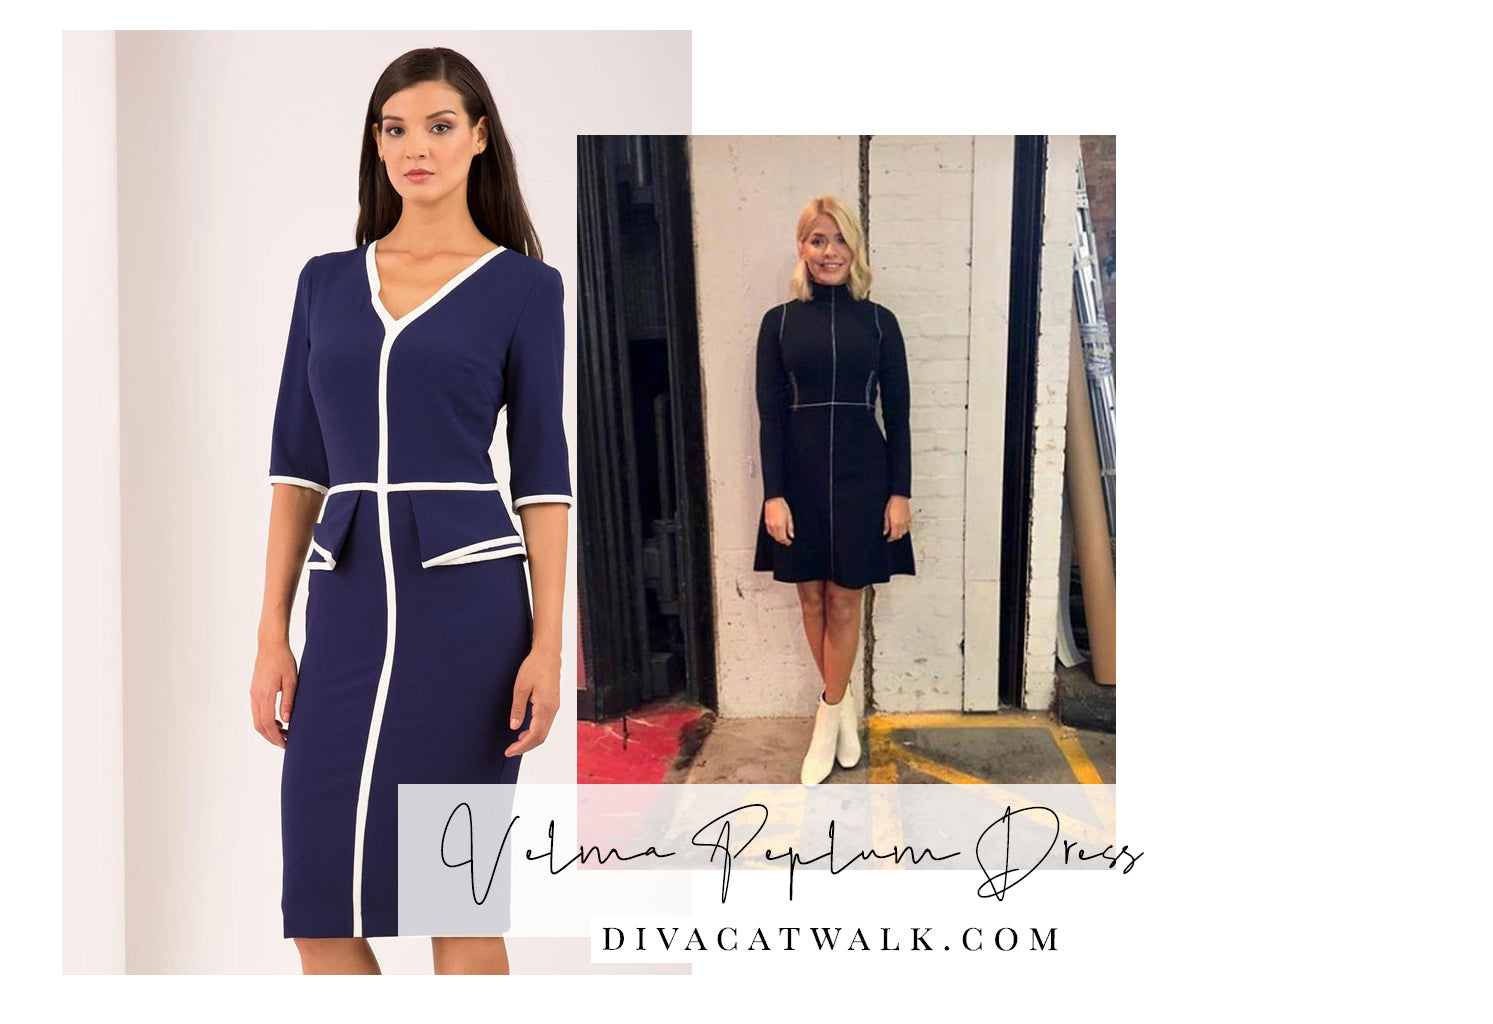  holly willoughby pictured in an navy dress with white piping, with an attached image of a similar dress available from Diva Catwalk.